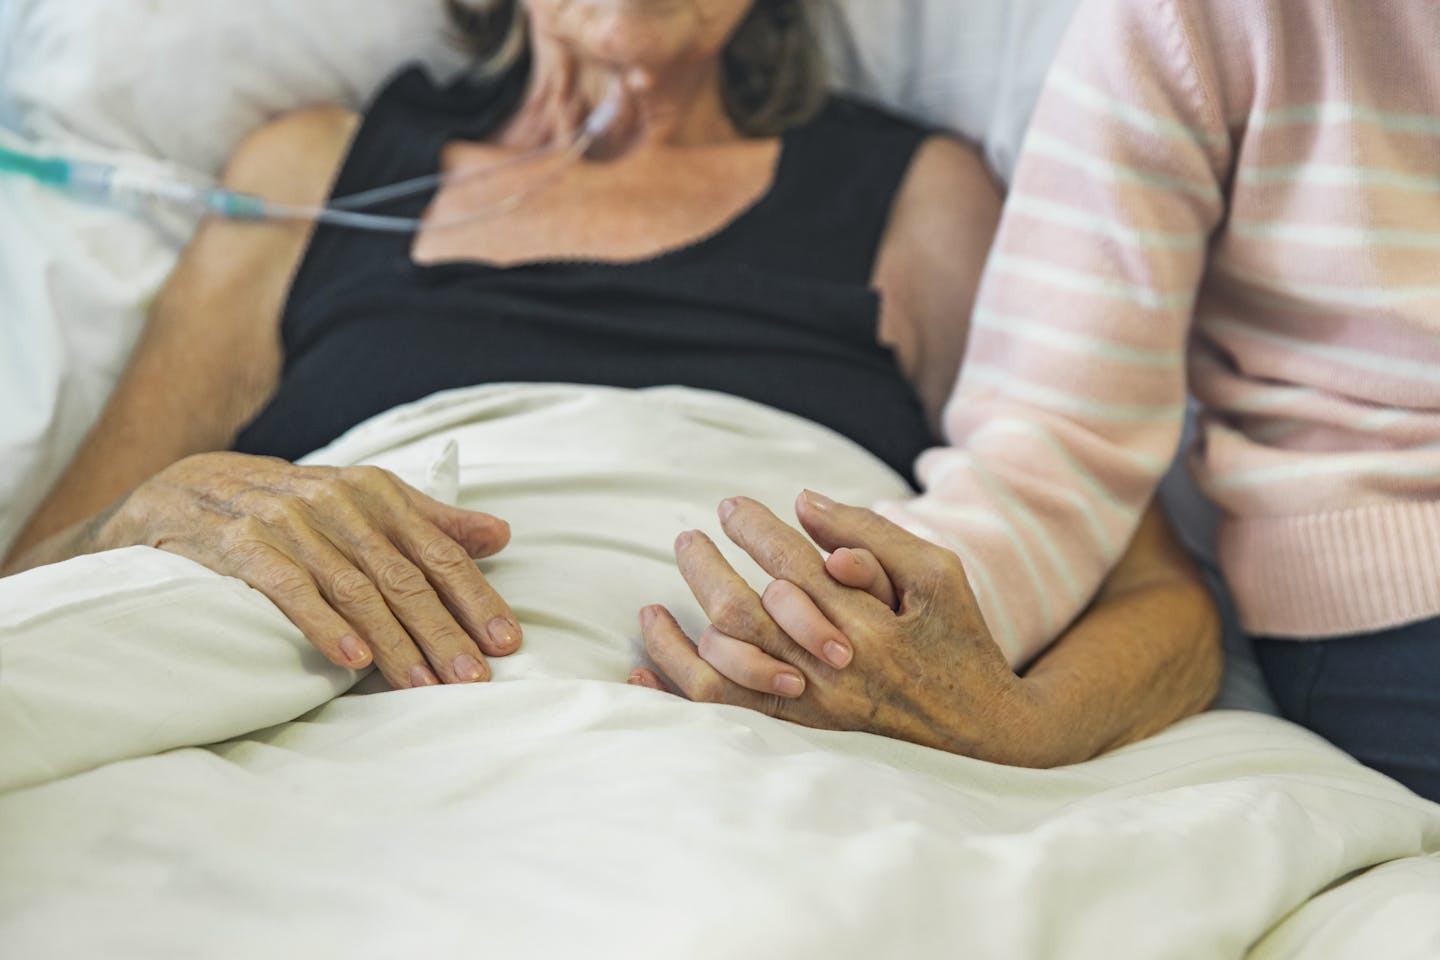 A dying woman is comforted by someone holding her hand.